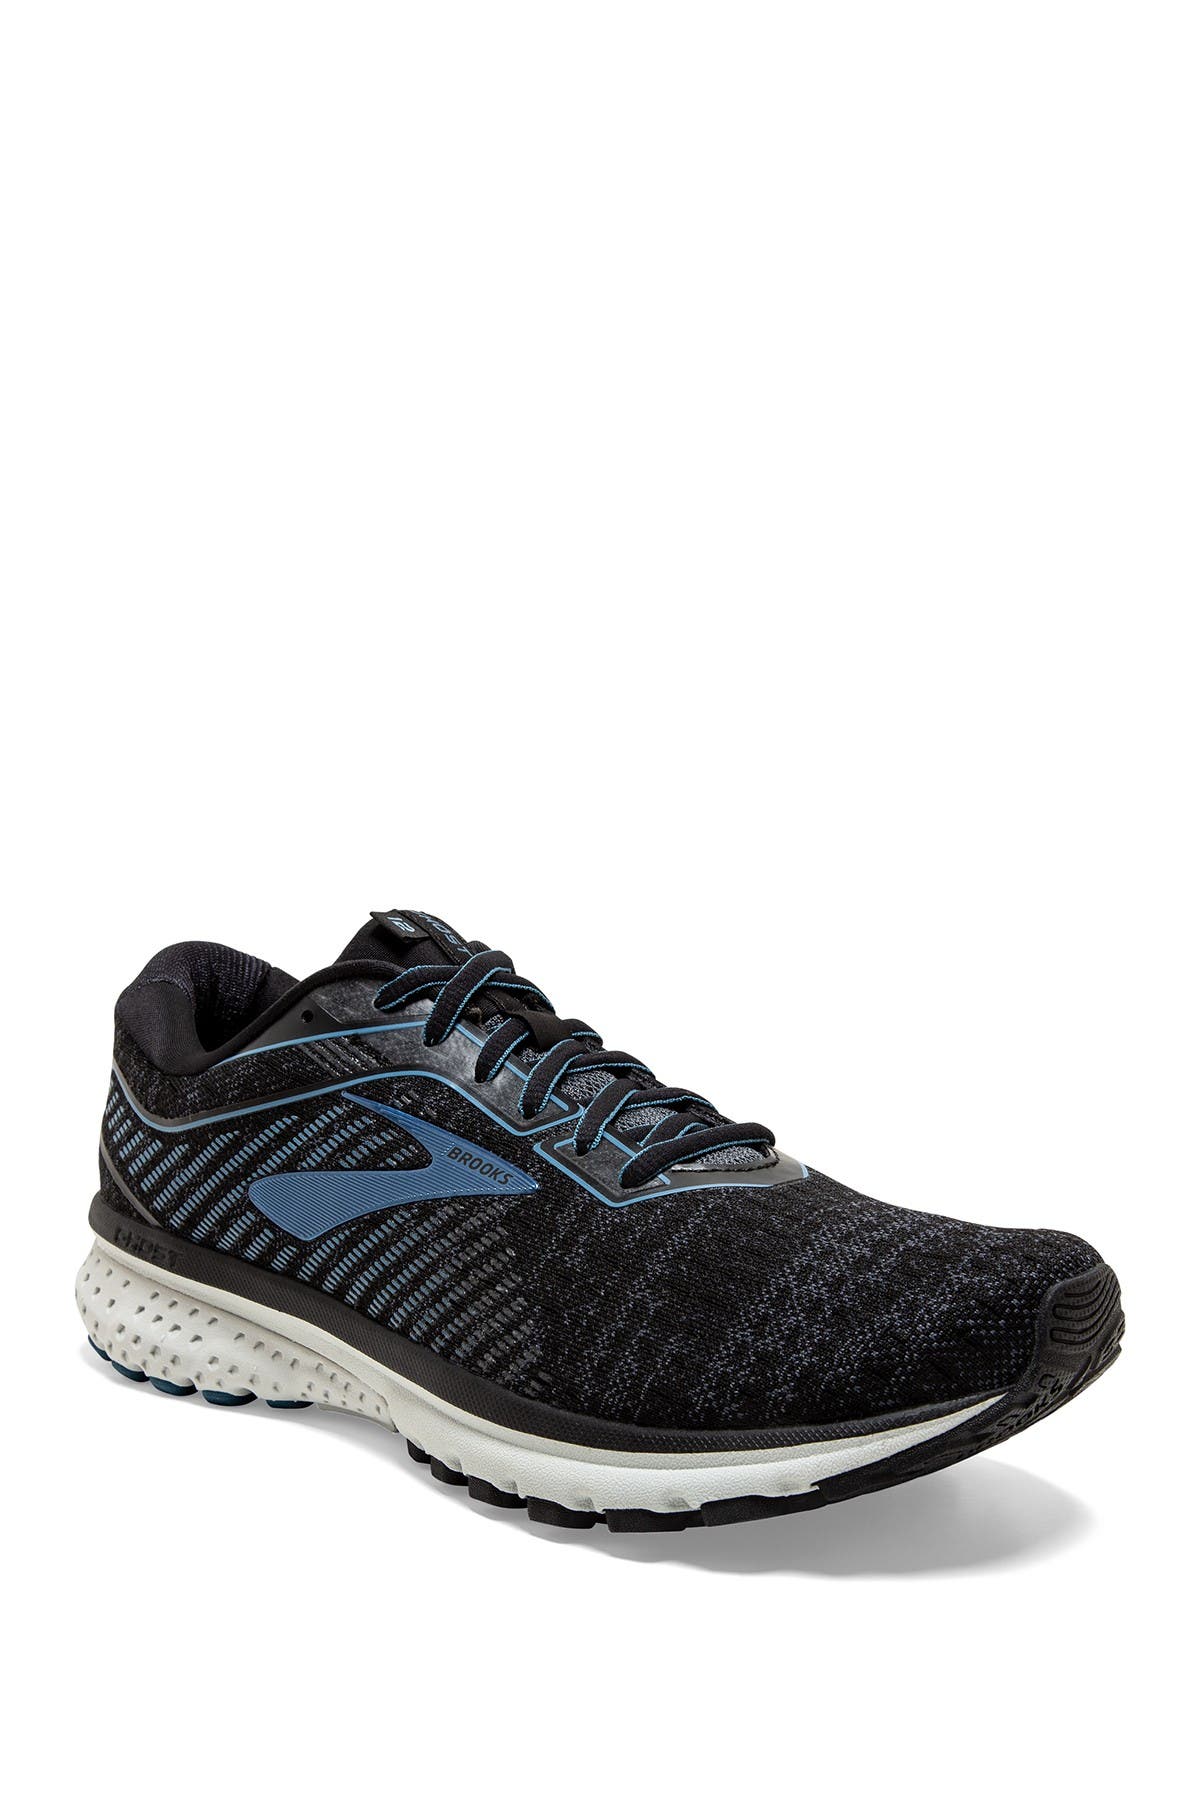 brooks ghost shoes sale